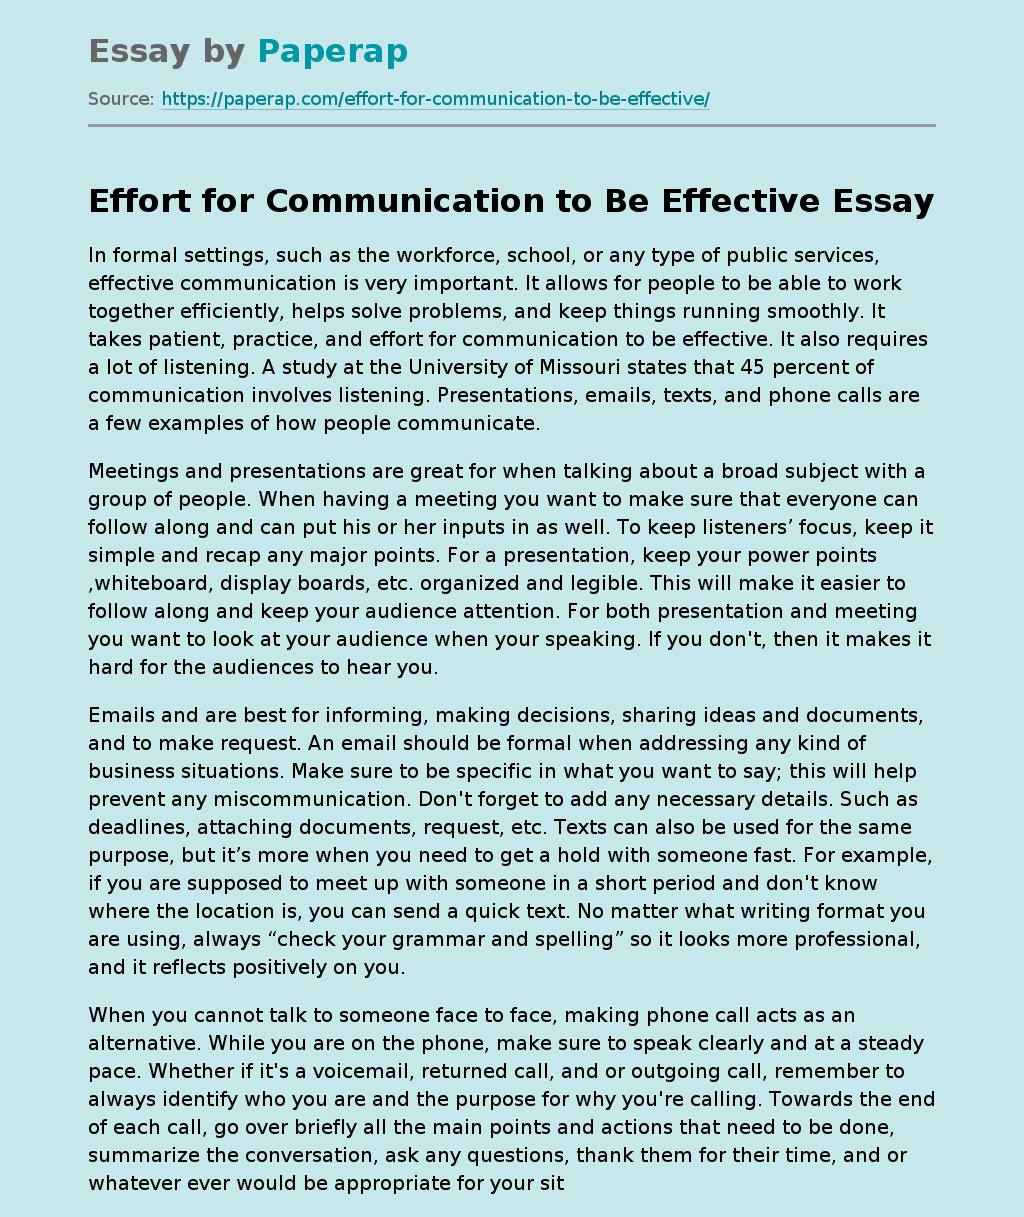 Effort for Communication to Be Effective